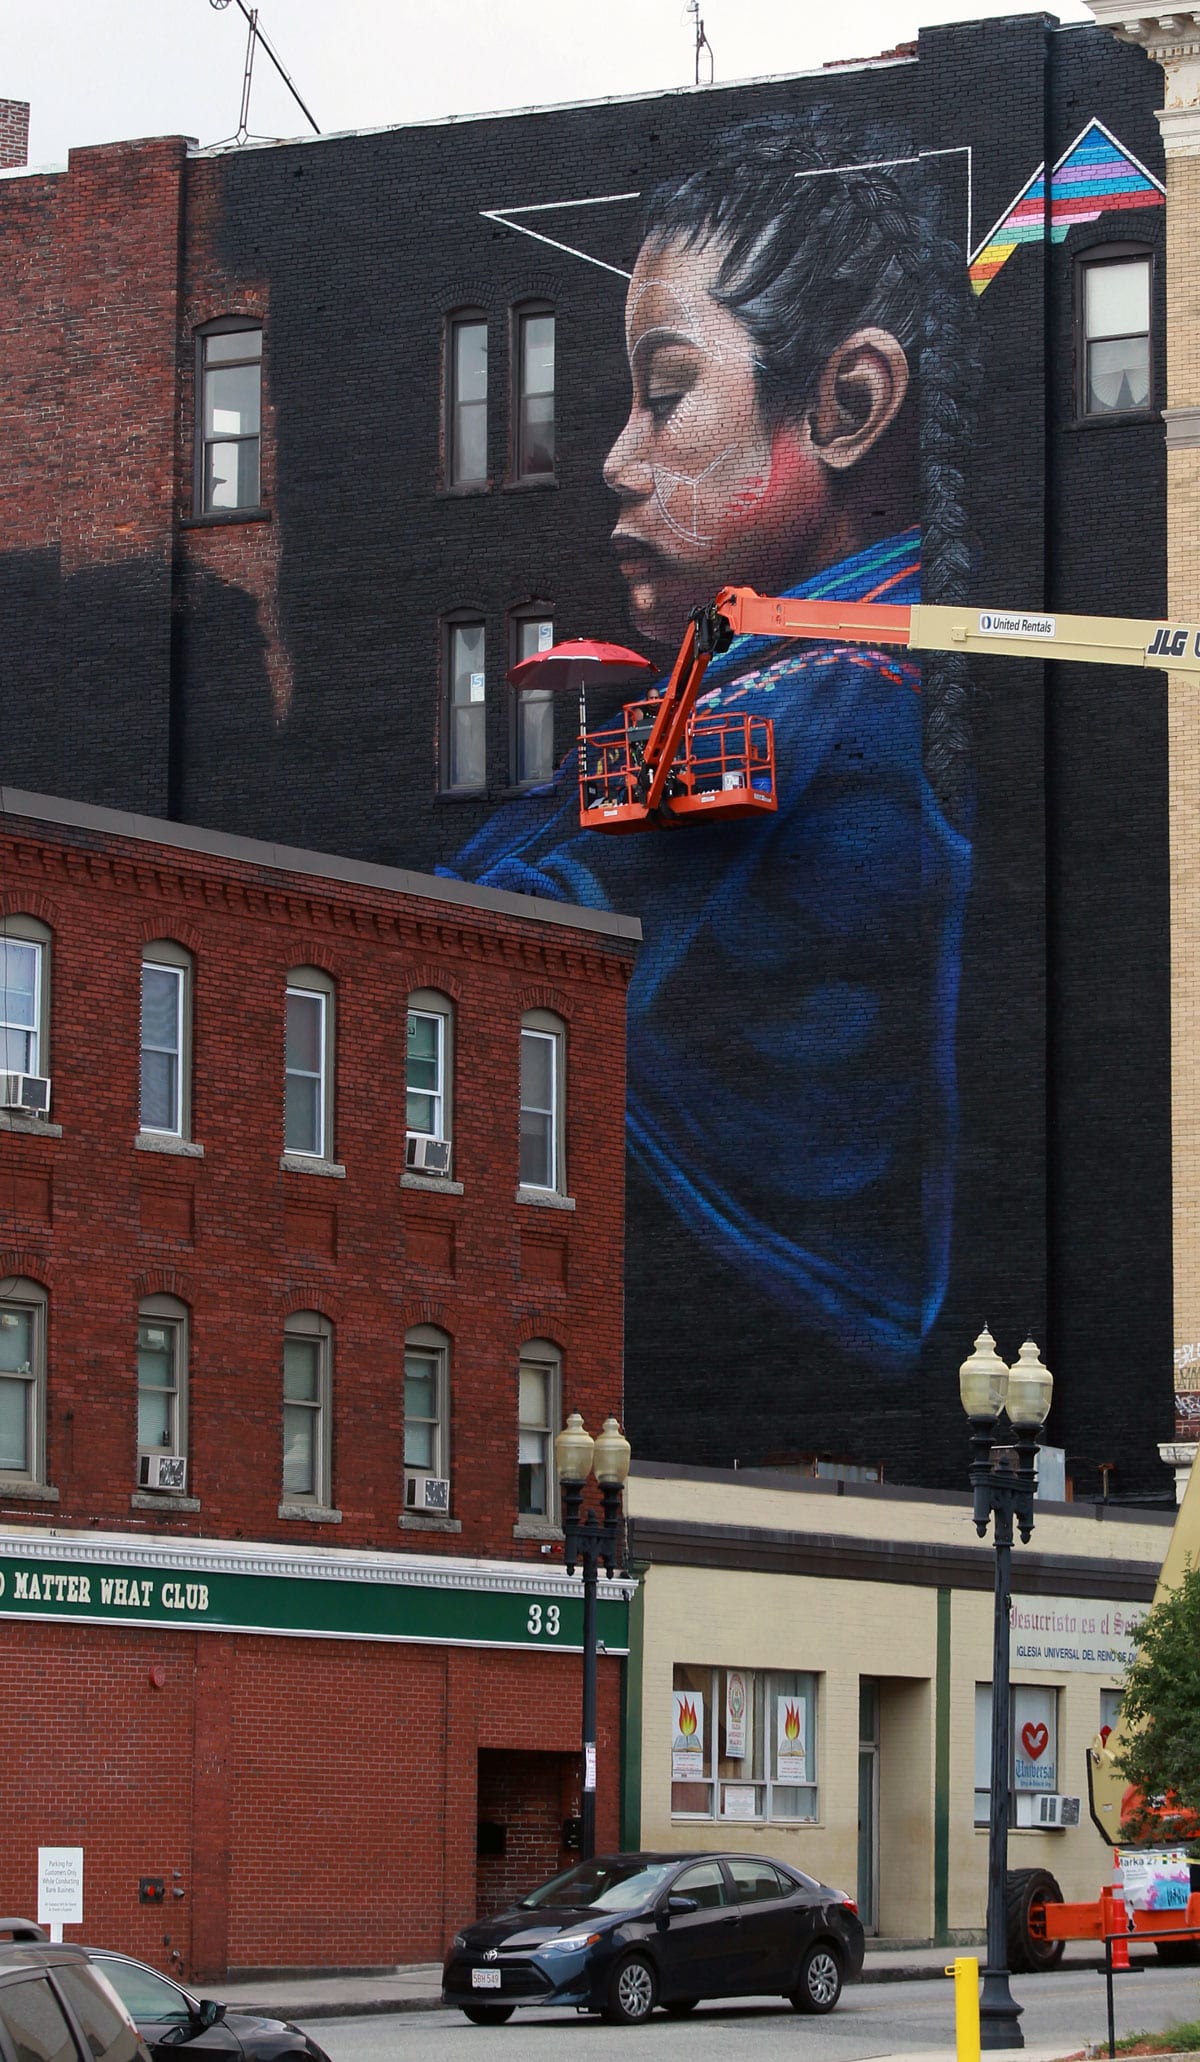 At right, a mural painted on the building at the corner of Spring and Exchange streets by Mexican-born and New York City-based artist Marka27.